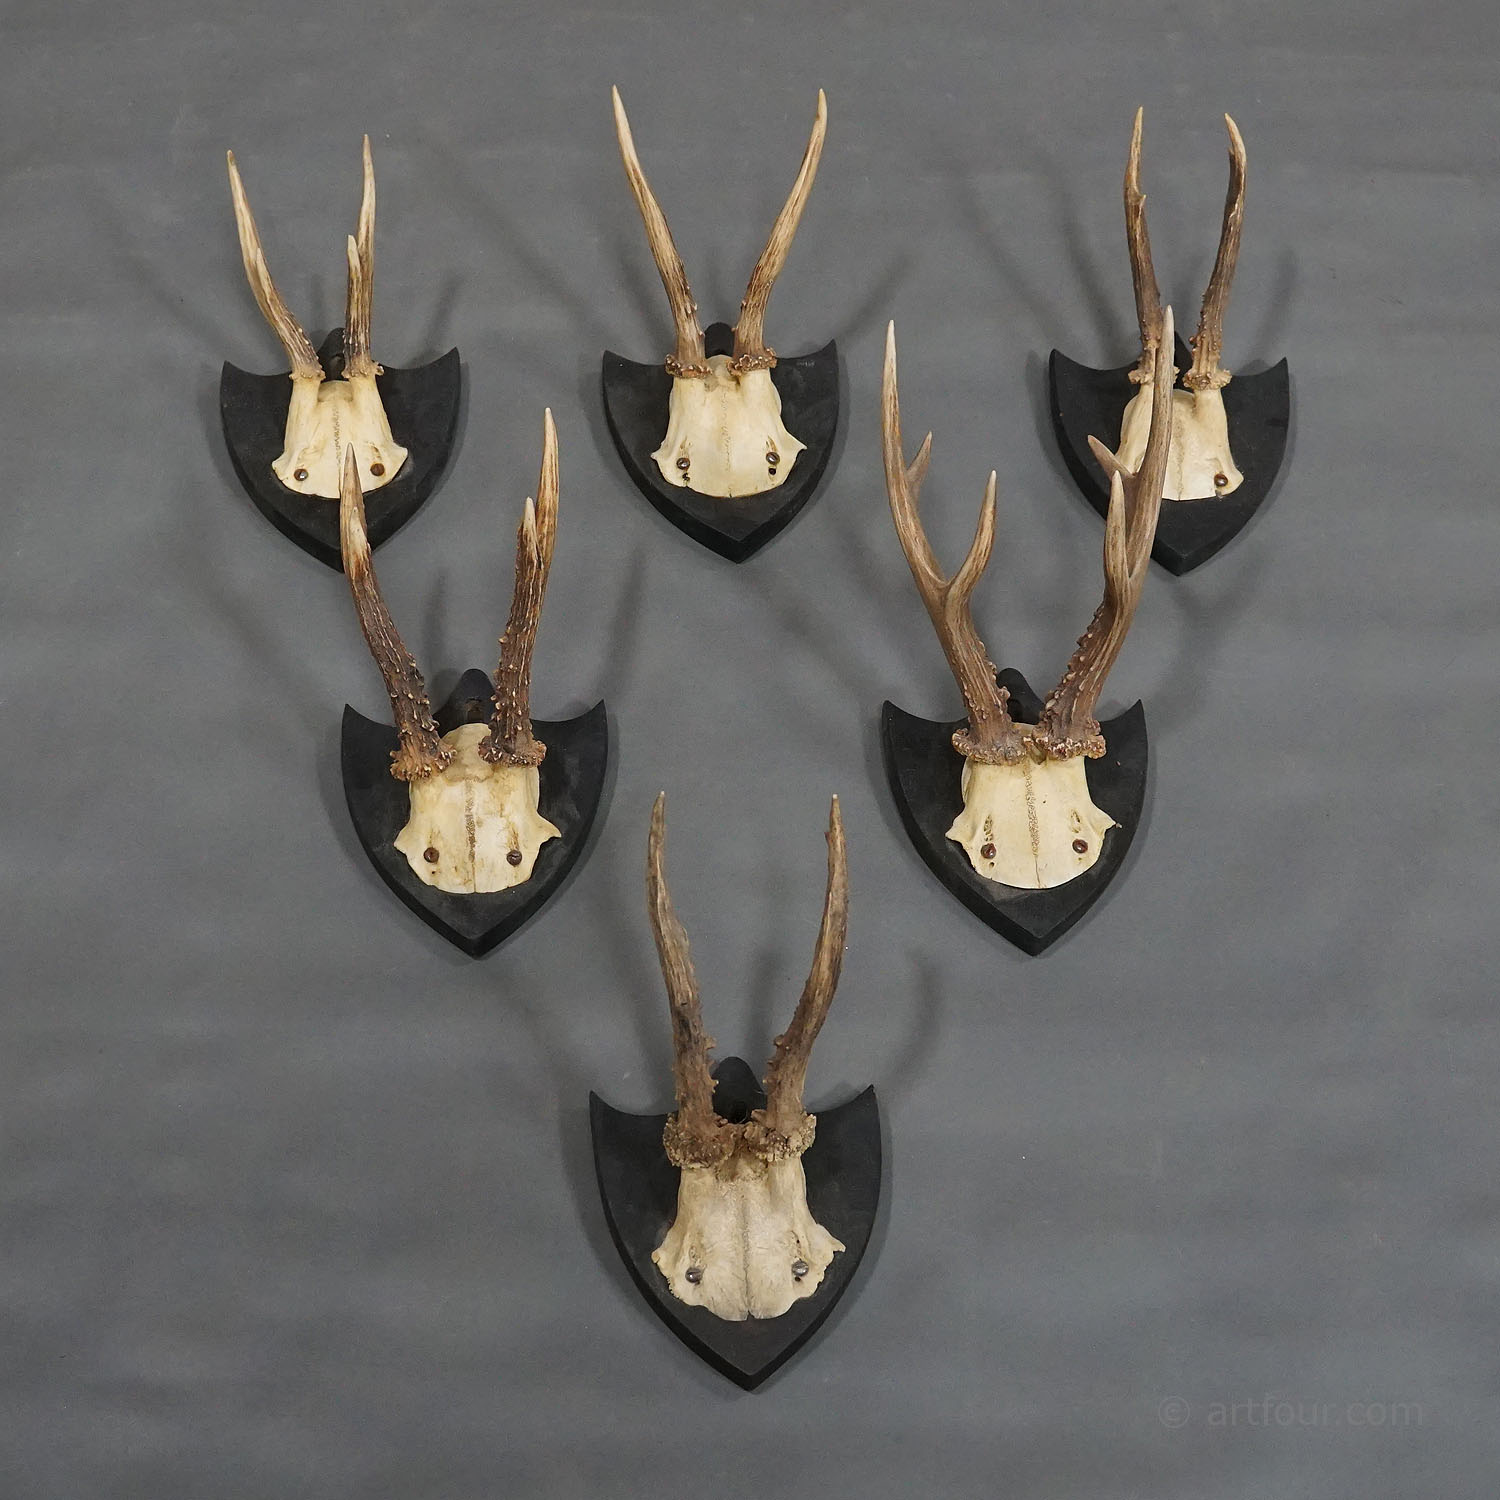 Six Antique Deer Trophies on Wooden Plaques Germany ca. 1870s